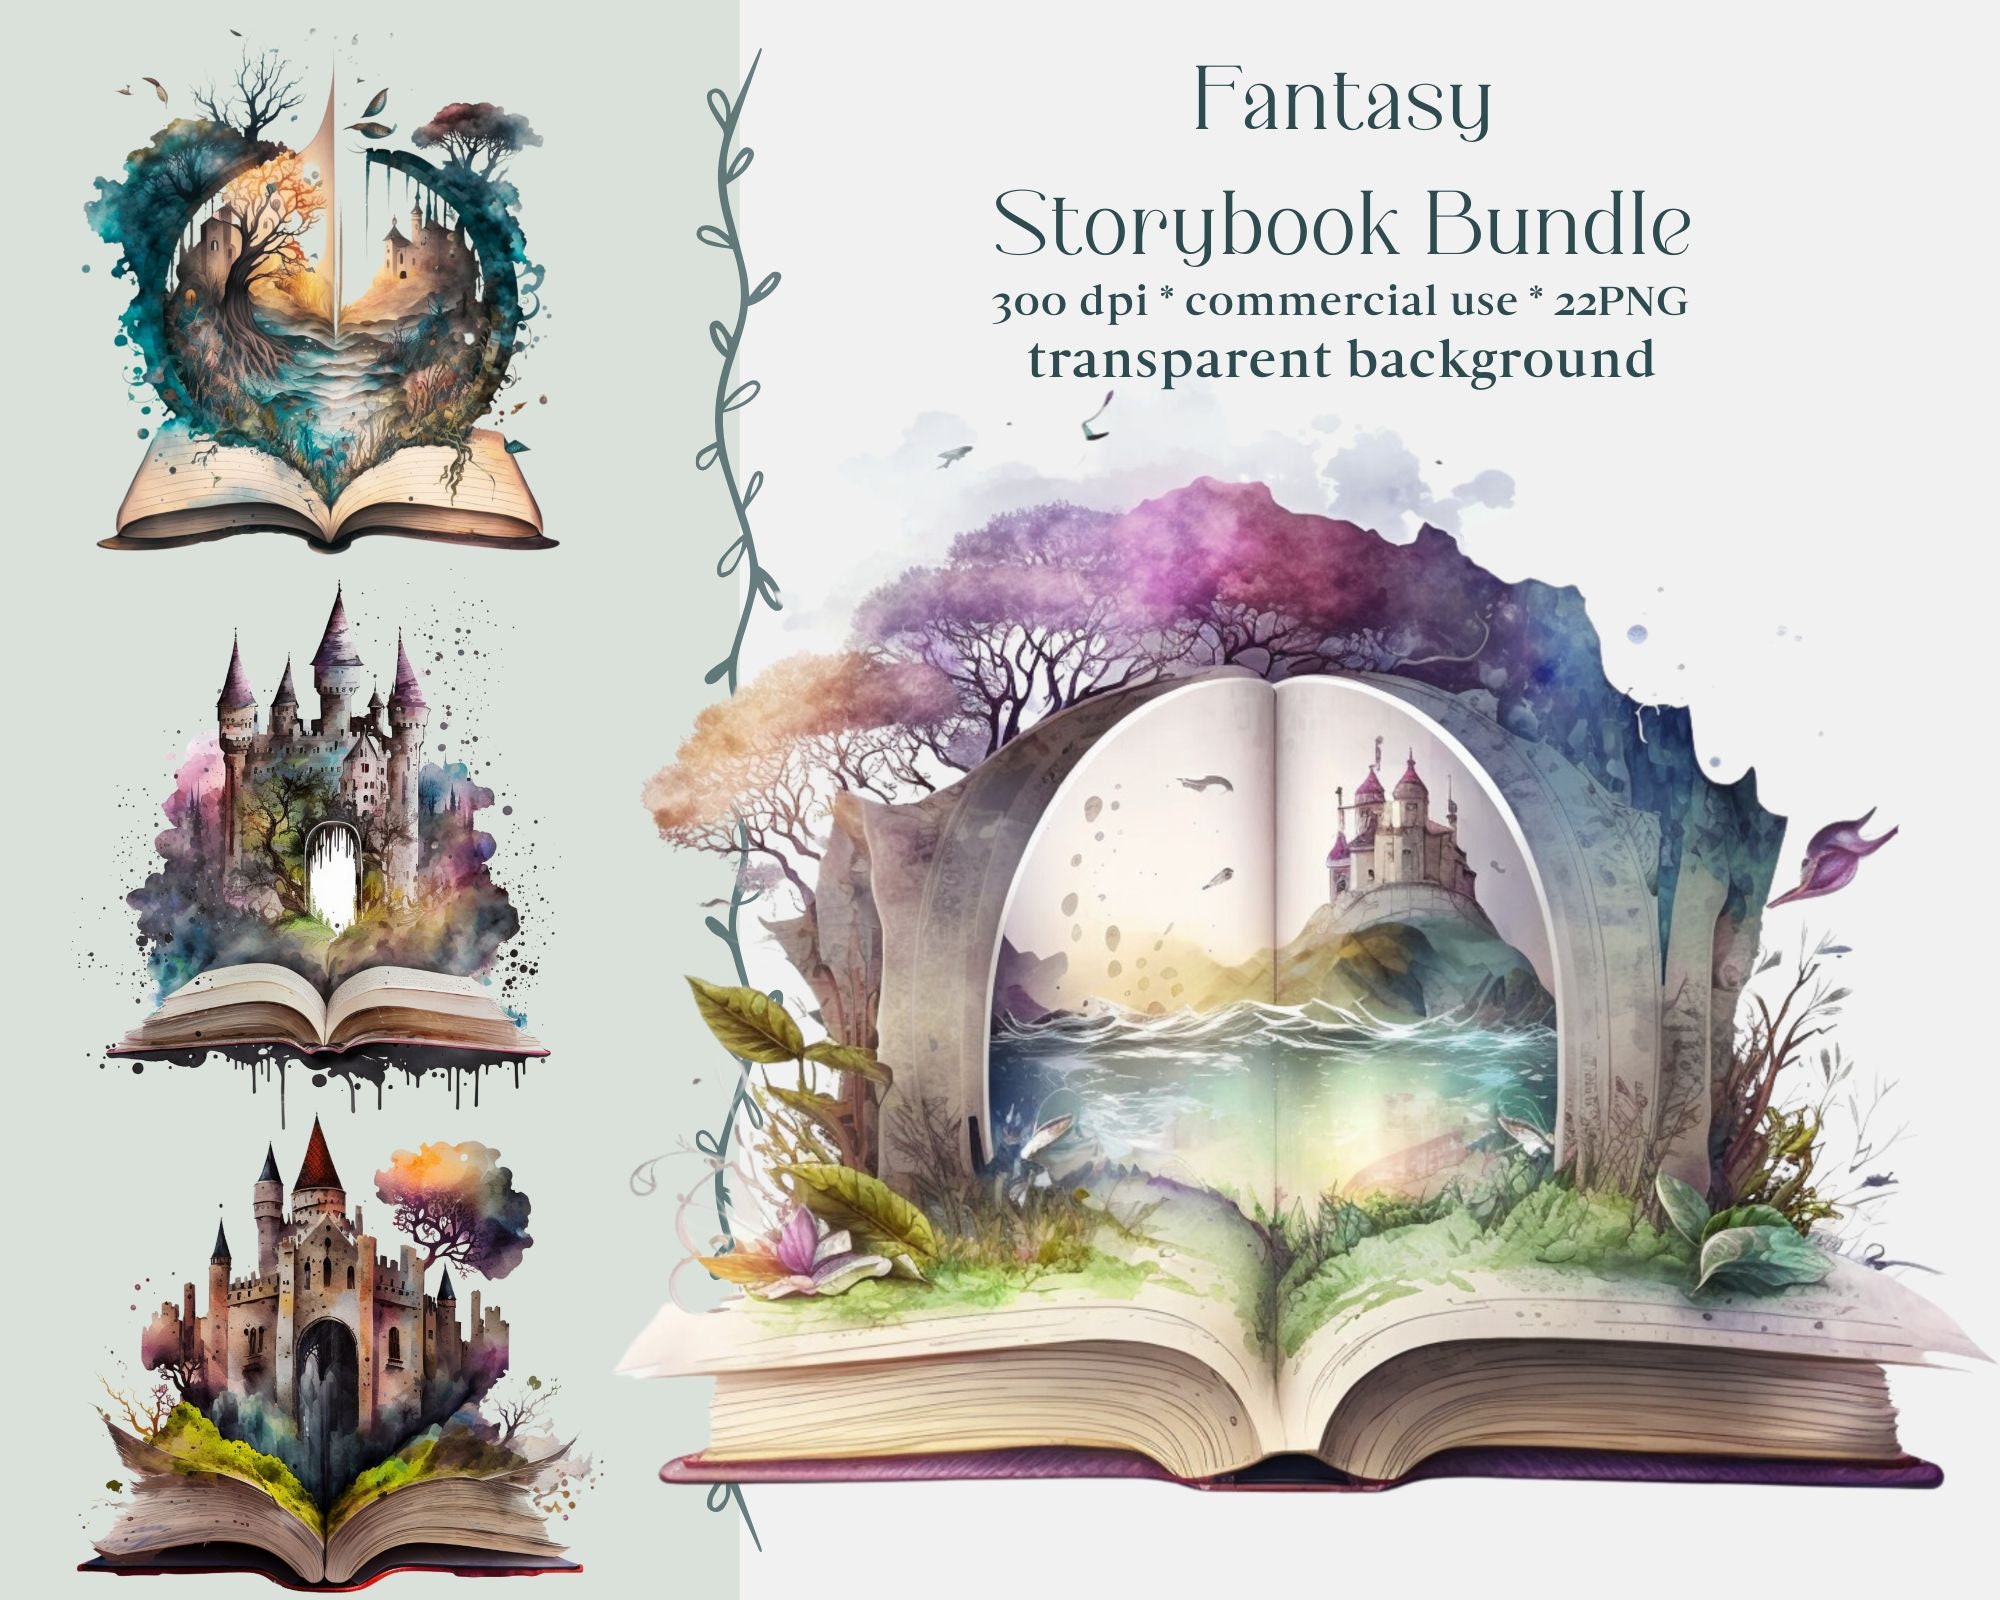 12 Watercolor Fantasy Books Clip Art. Open Book PNG Bundle. Magic Book/stacked  Booksclipart. Book Lover, Bookish Bookworm Sublimation. 